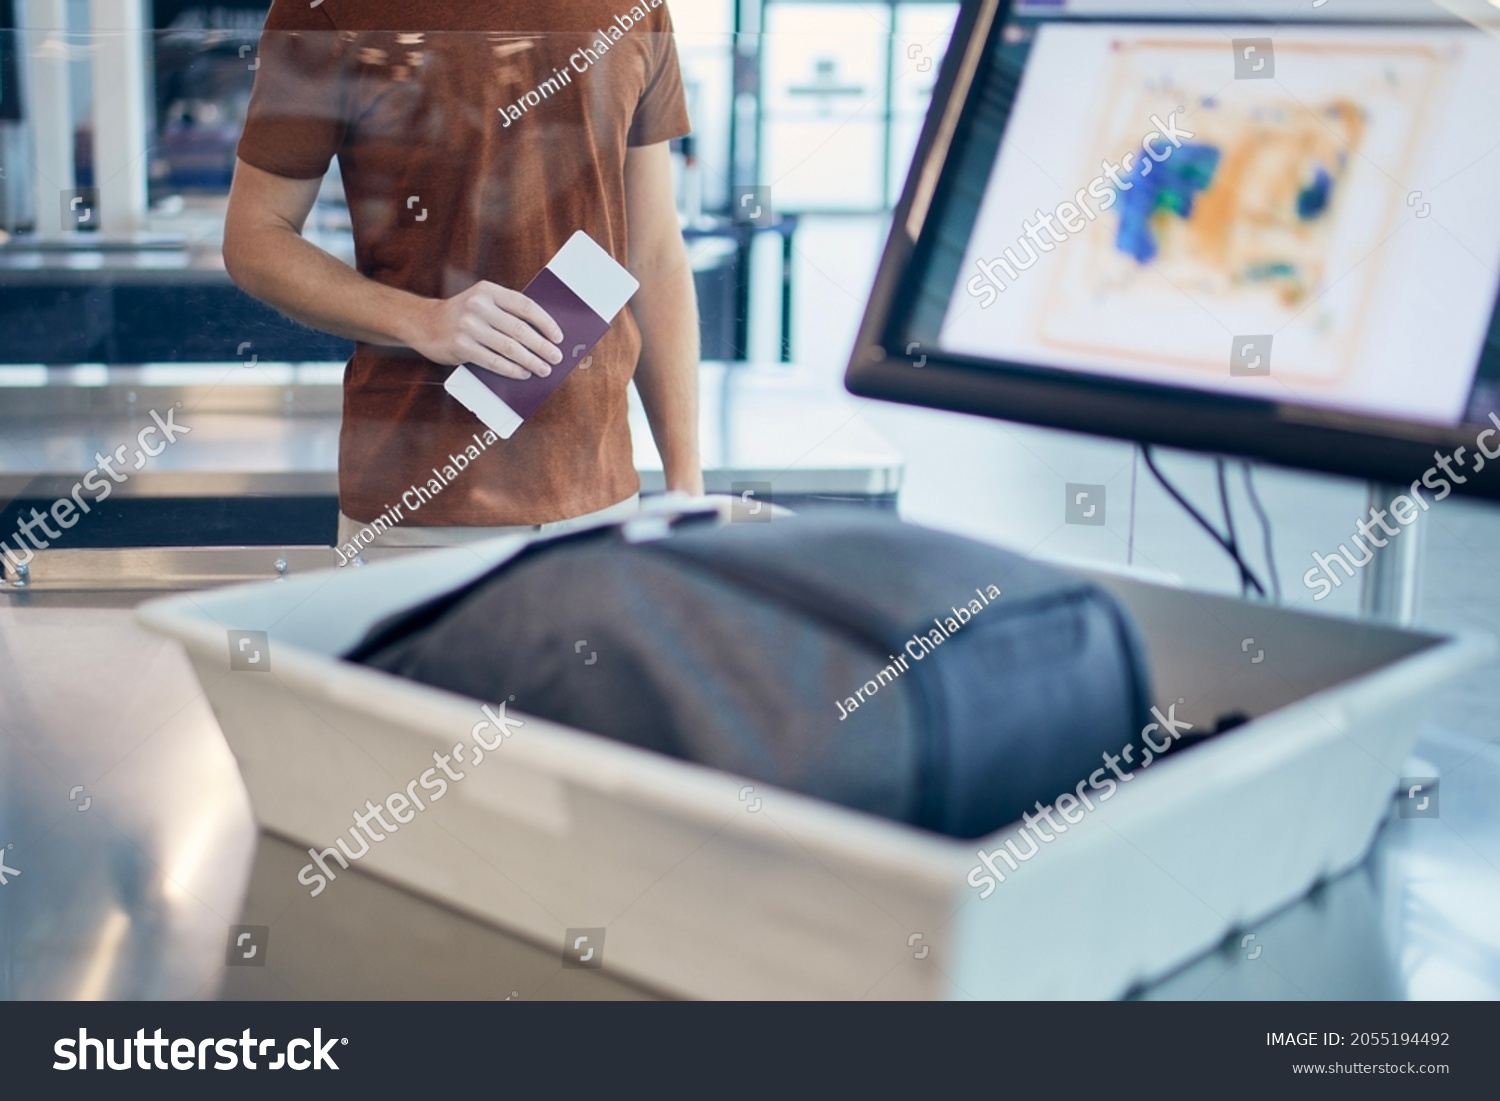 Airport security check. Young man waiting for x-ray control his bag.
 #2055194492